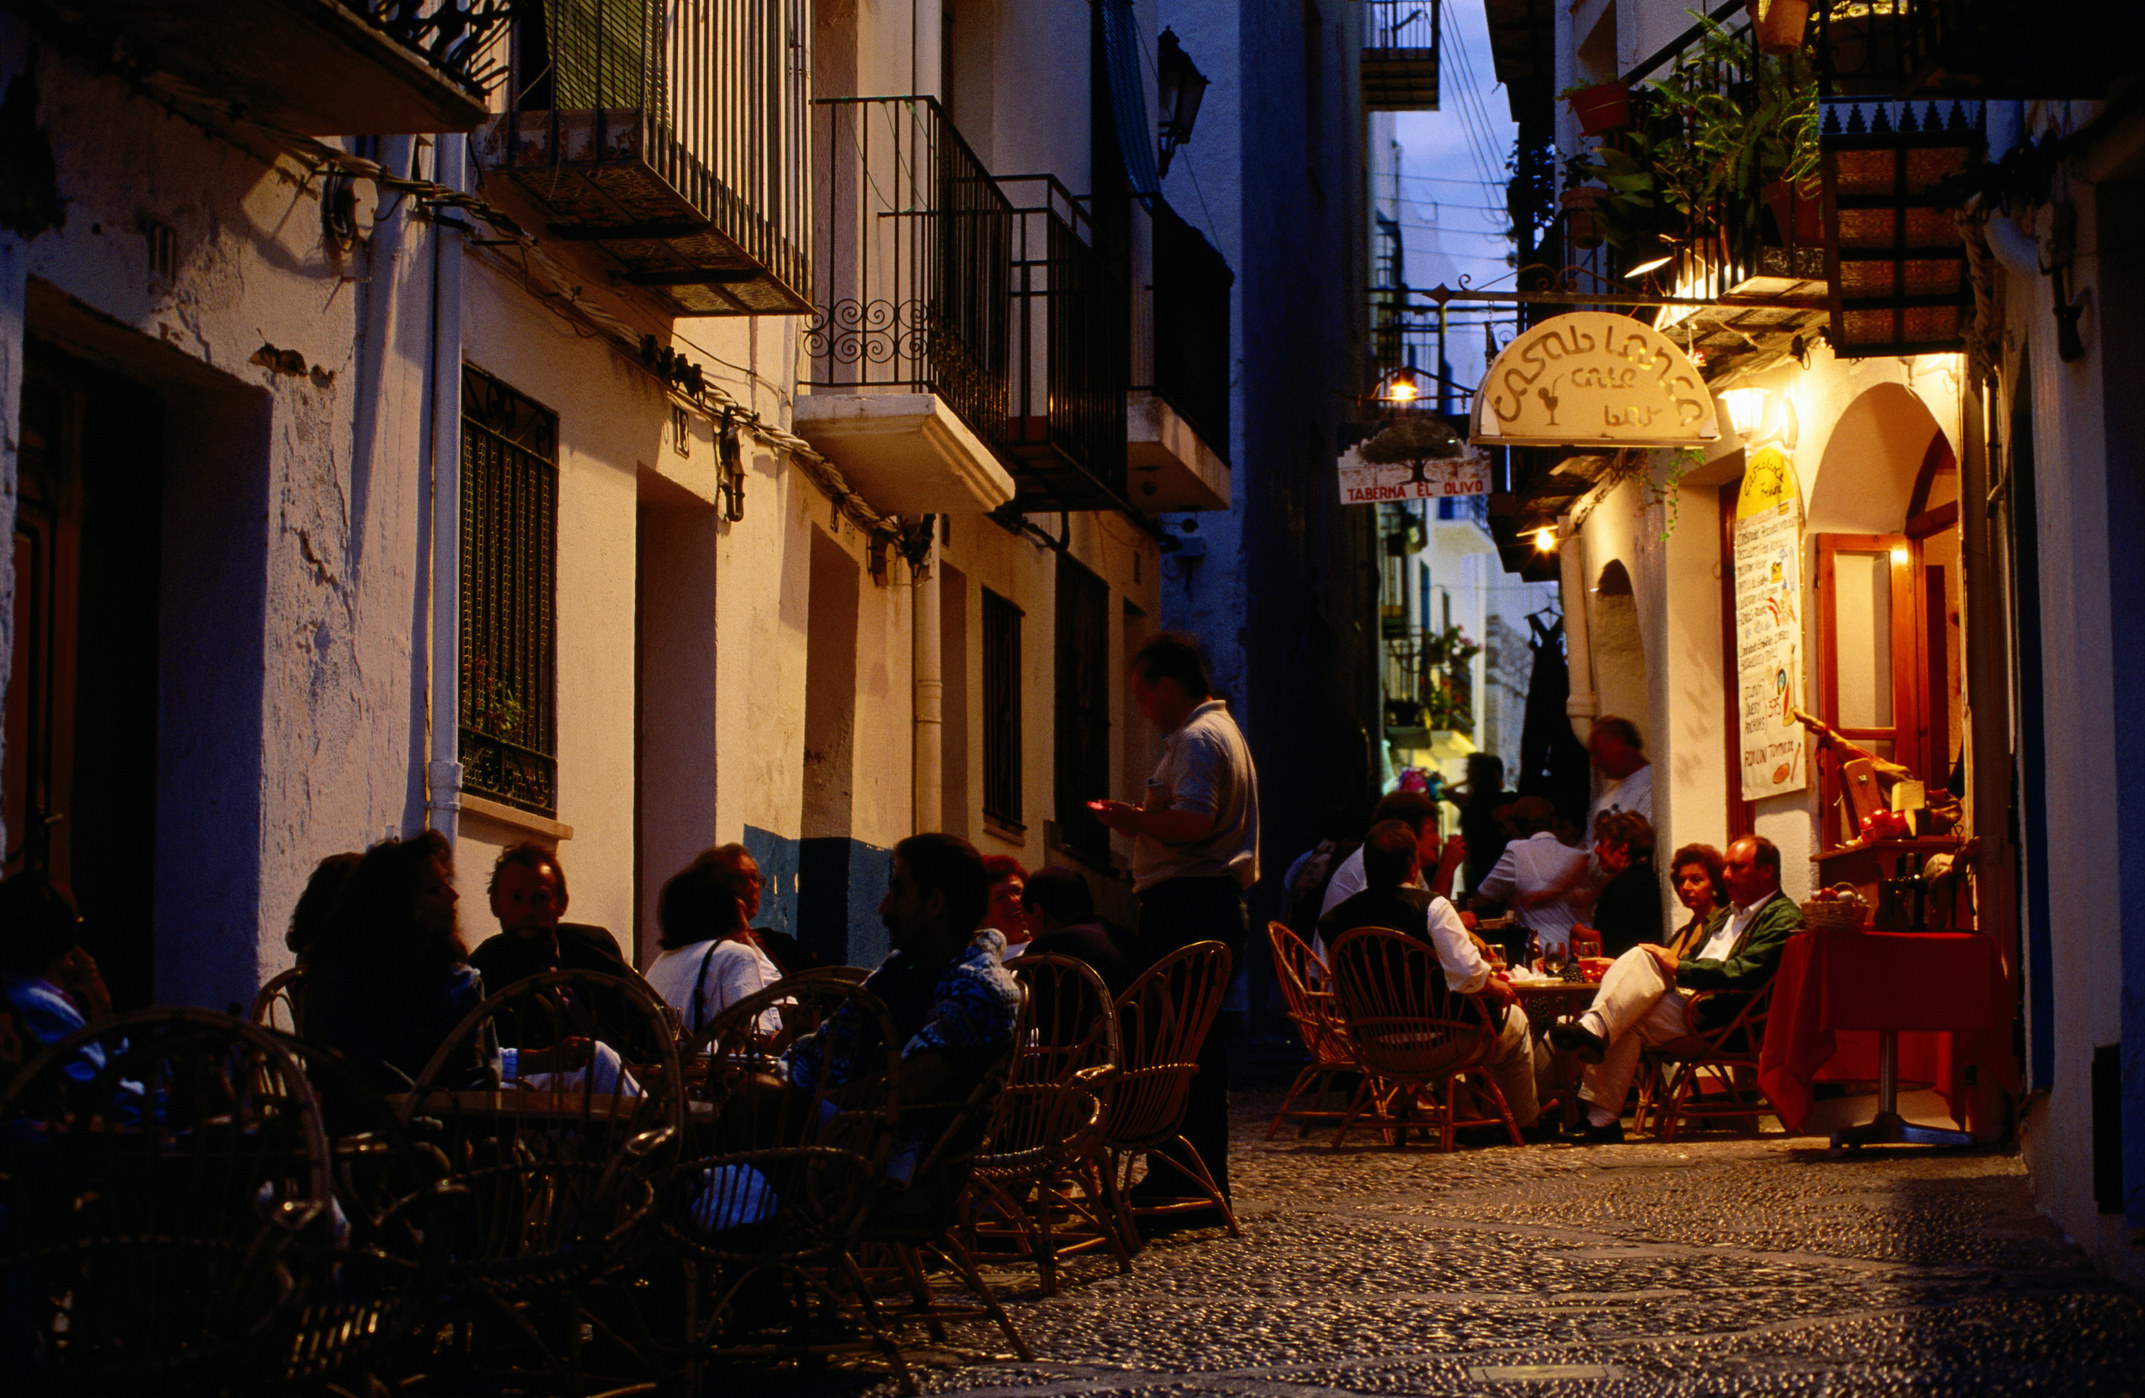 People eating outdoors at a restaurant at night.